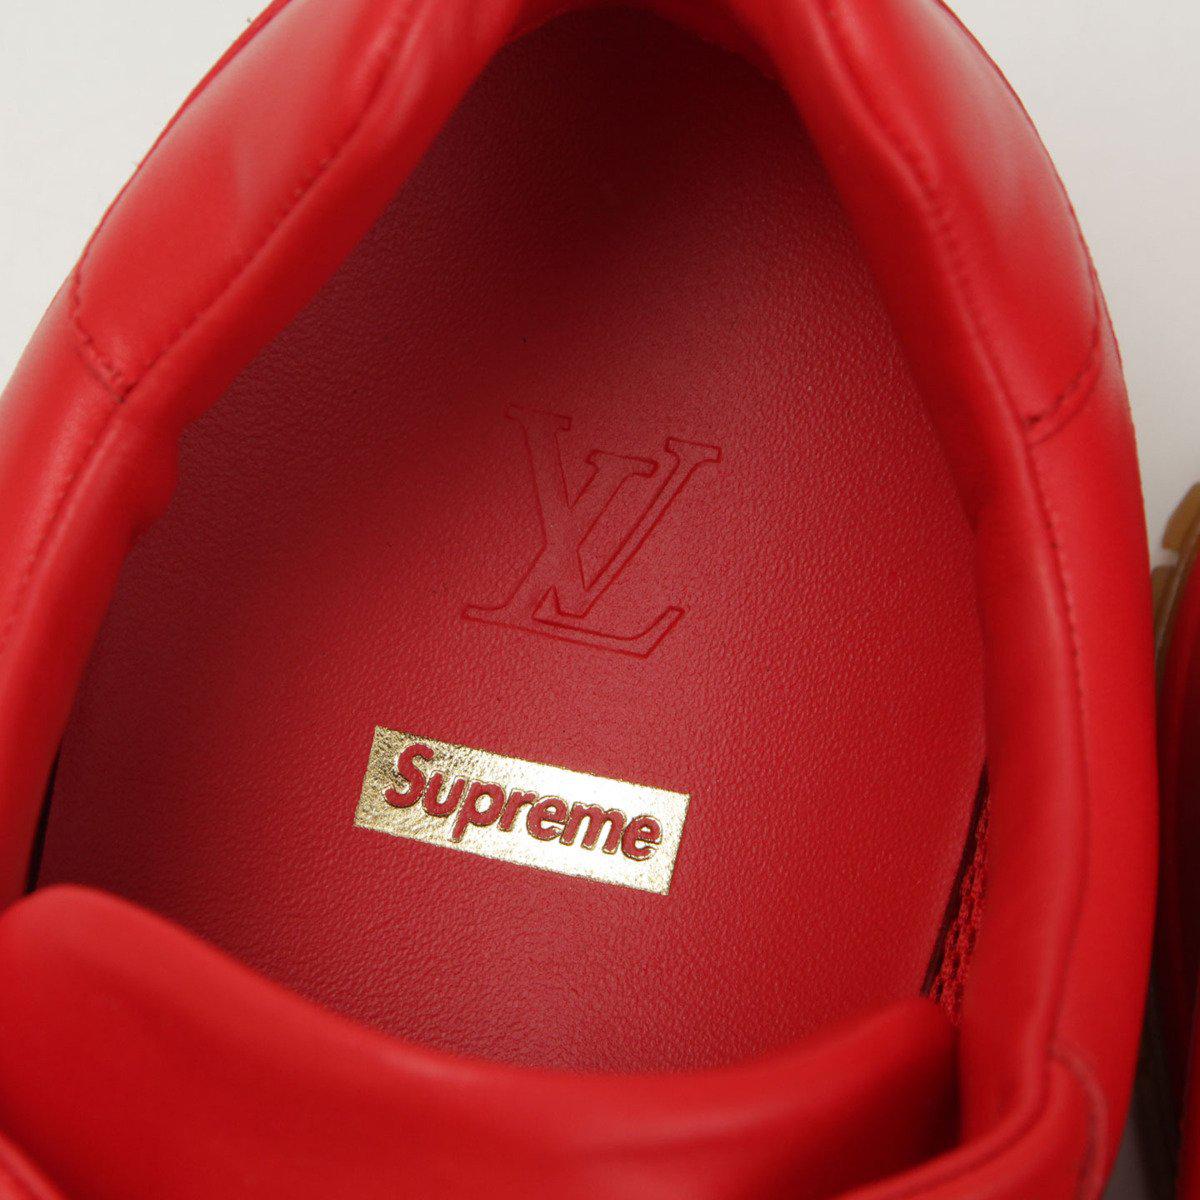 Louis Vuitton X Supreme Limited Edition Perforated Leather Runaway Sneakers in Red for Men - Lyst